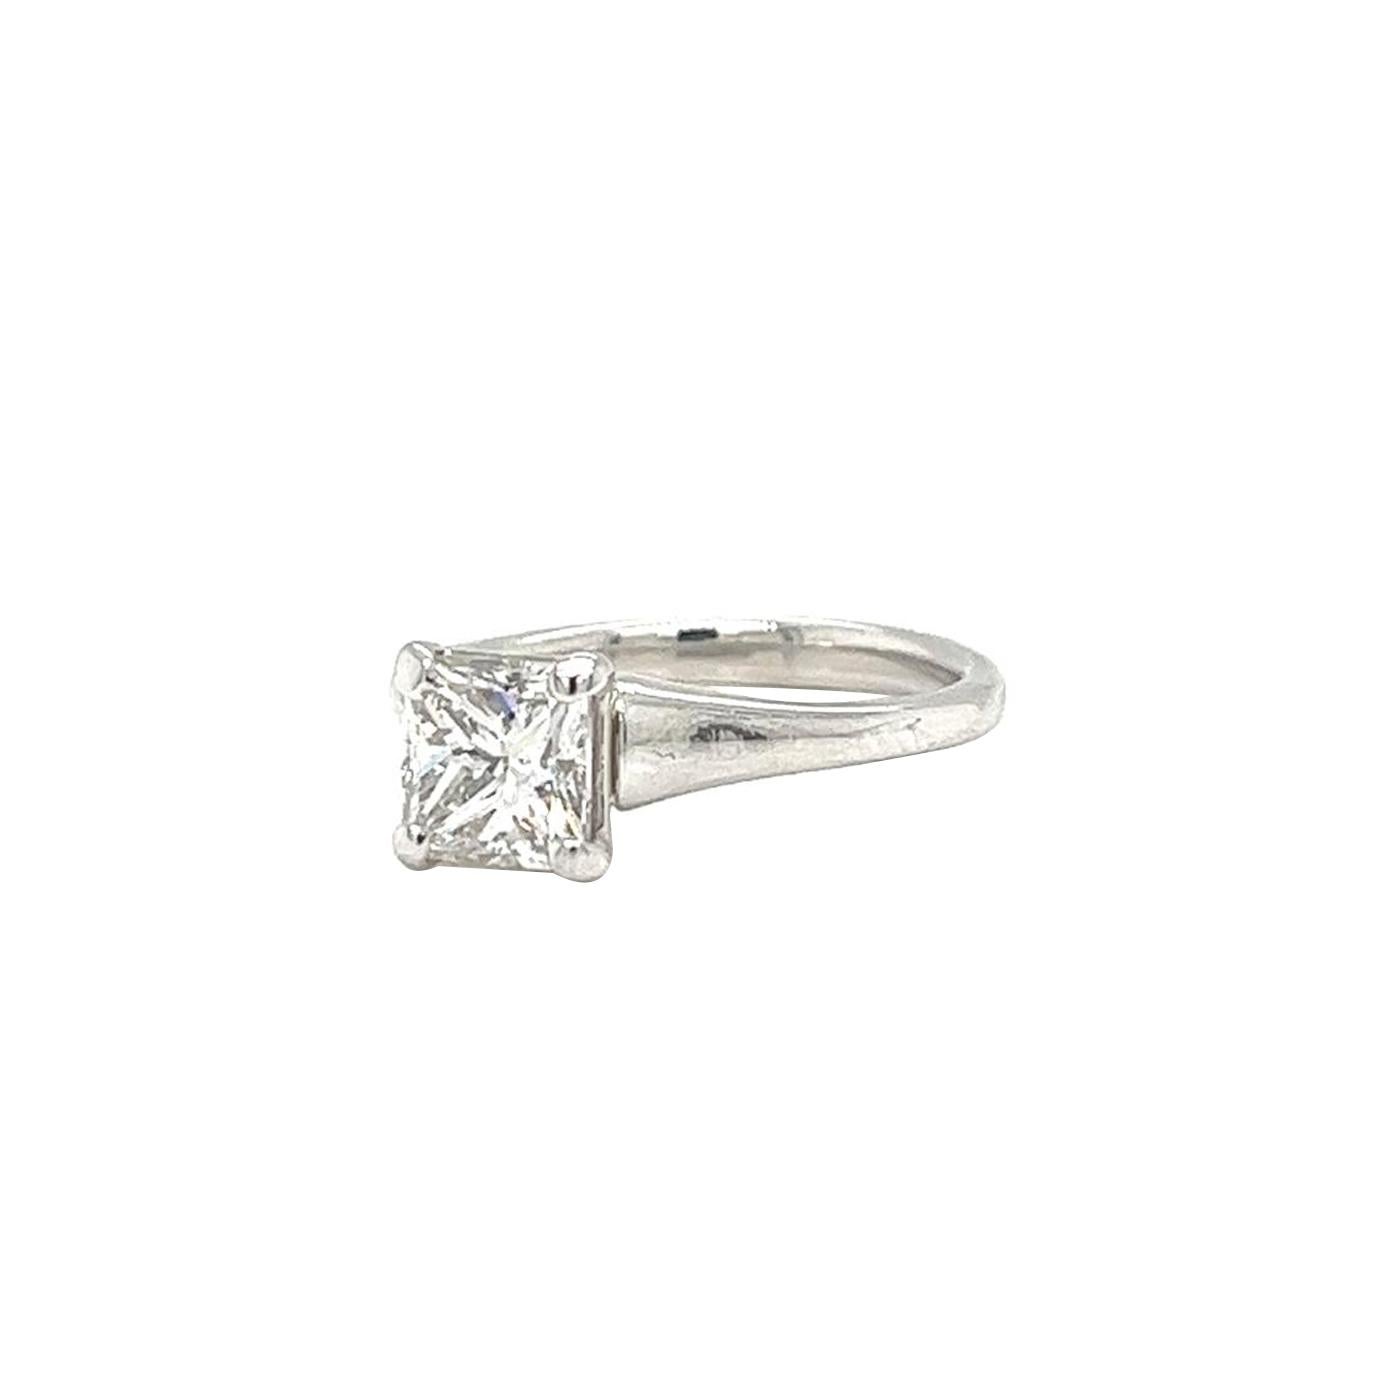 GIA 1.50ct Natural Princess Cut Diamond Engagement Ring in Platinum VS2 Clarity In Good Condition For Sale In Aventura, FL